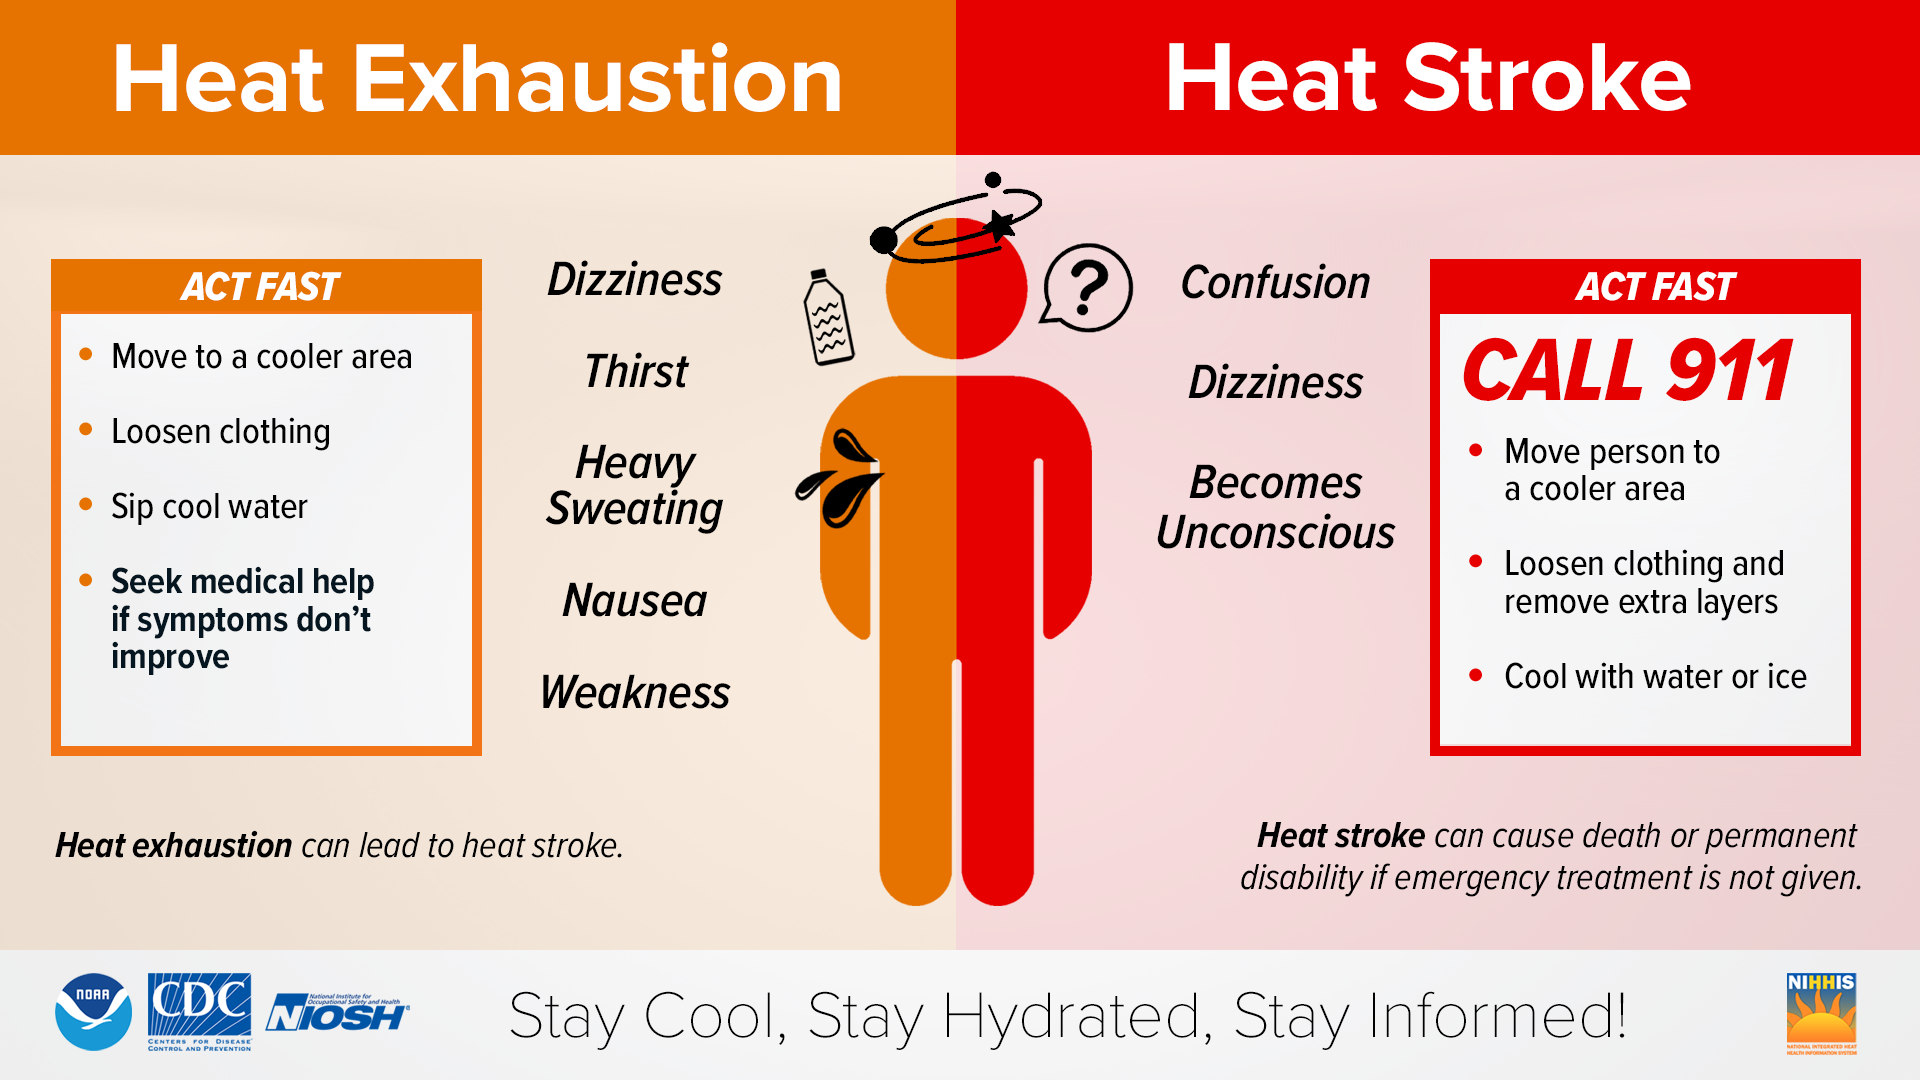 Heat Exhaustion vs Heat Stroke. Symptoms of heat exhaustion include dizziness, thirst, heavy sweating, nausea, and weakness. Act fast by moving to a cooler area, loosening clothing, sipping cool water. Seek medical help if symptoms don't improve. Heat exhaustion can lead to heat stroke. Symptoms of heat stroke include confusion, dizzines, and becoming unconscious. Act fast by calling 911, moving the person to a cooler area, loosening clothing and removing extra layers, and cooling with water or ice. Heat stroke can cause death or permanent disability if emergency treatment is not given.